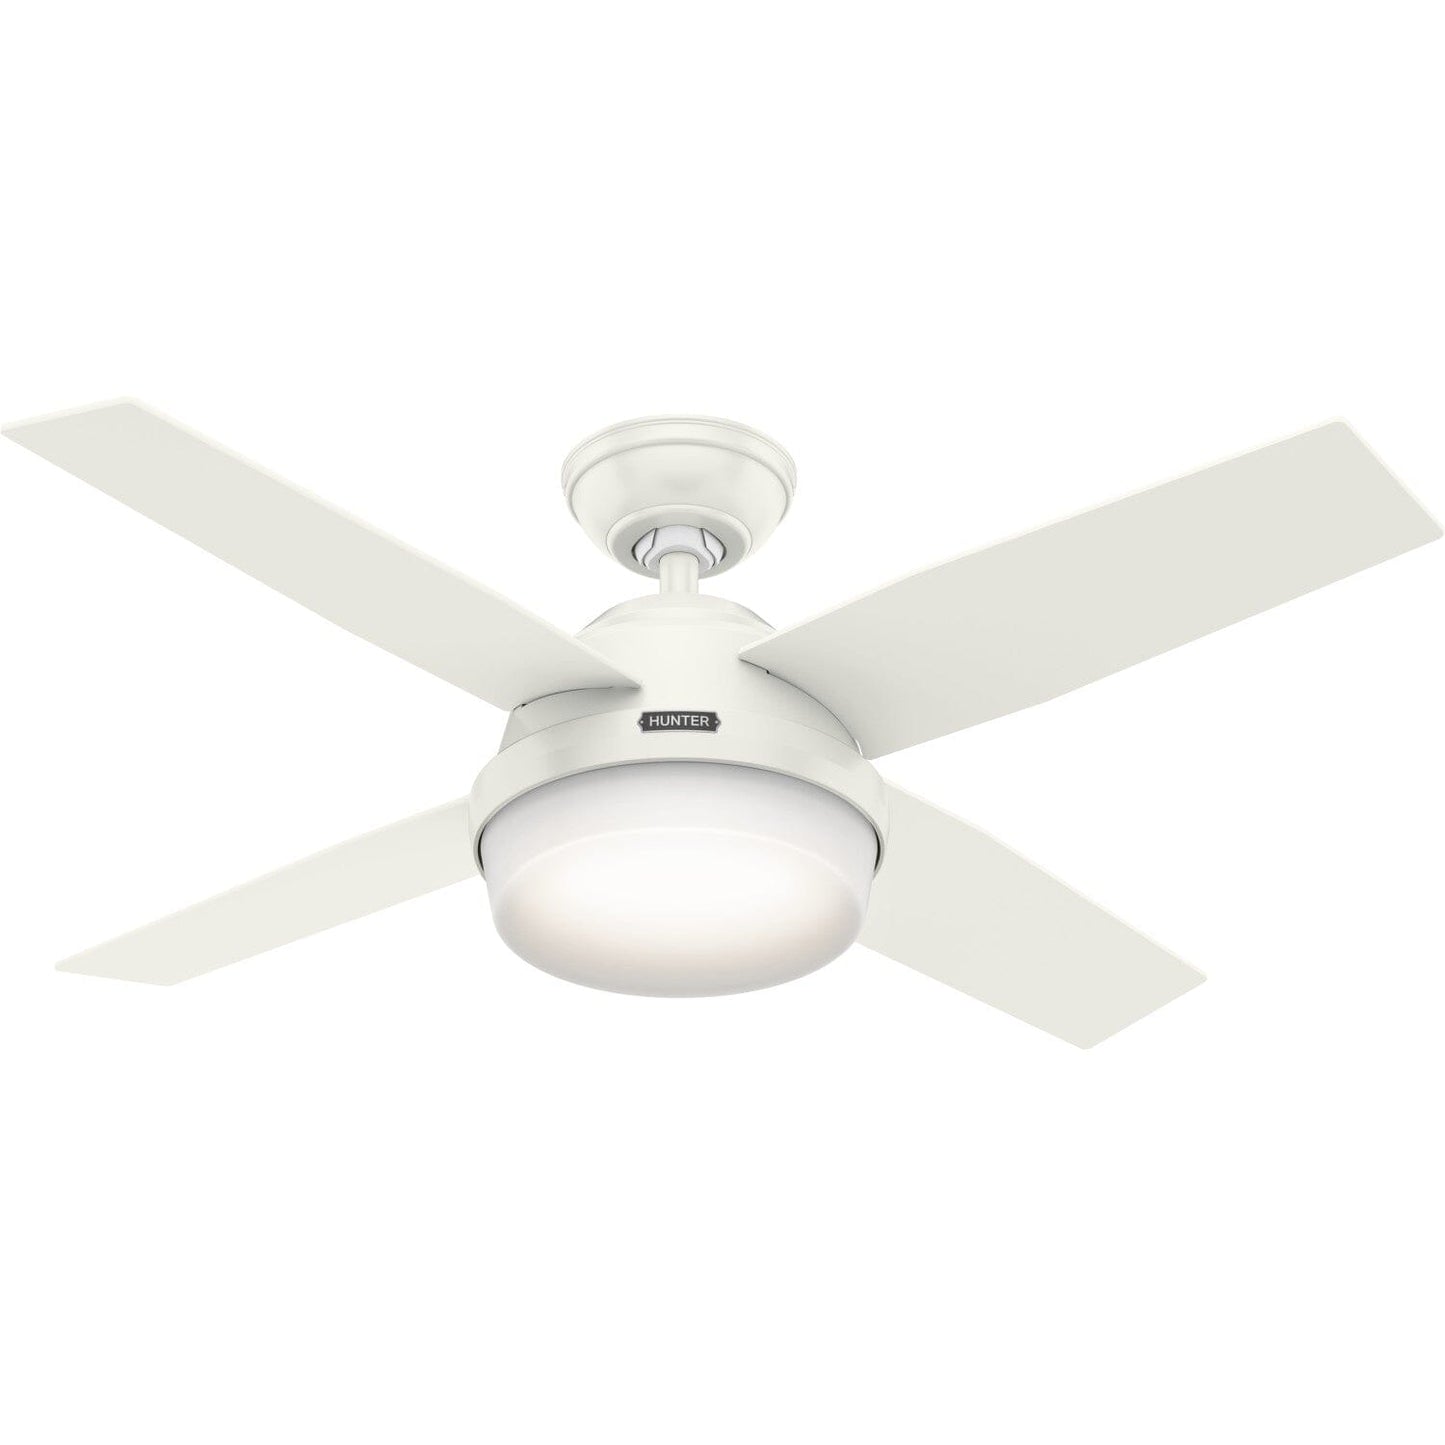 Dempsey with Light 44 inch Ceiling Fans Hunter Fresh White - Blonde Oak 